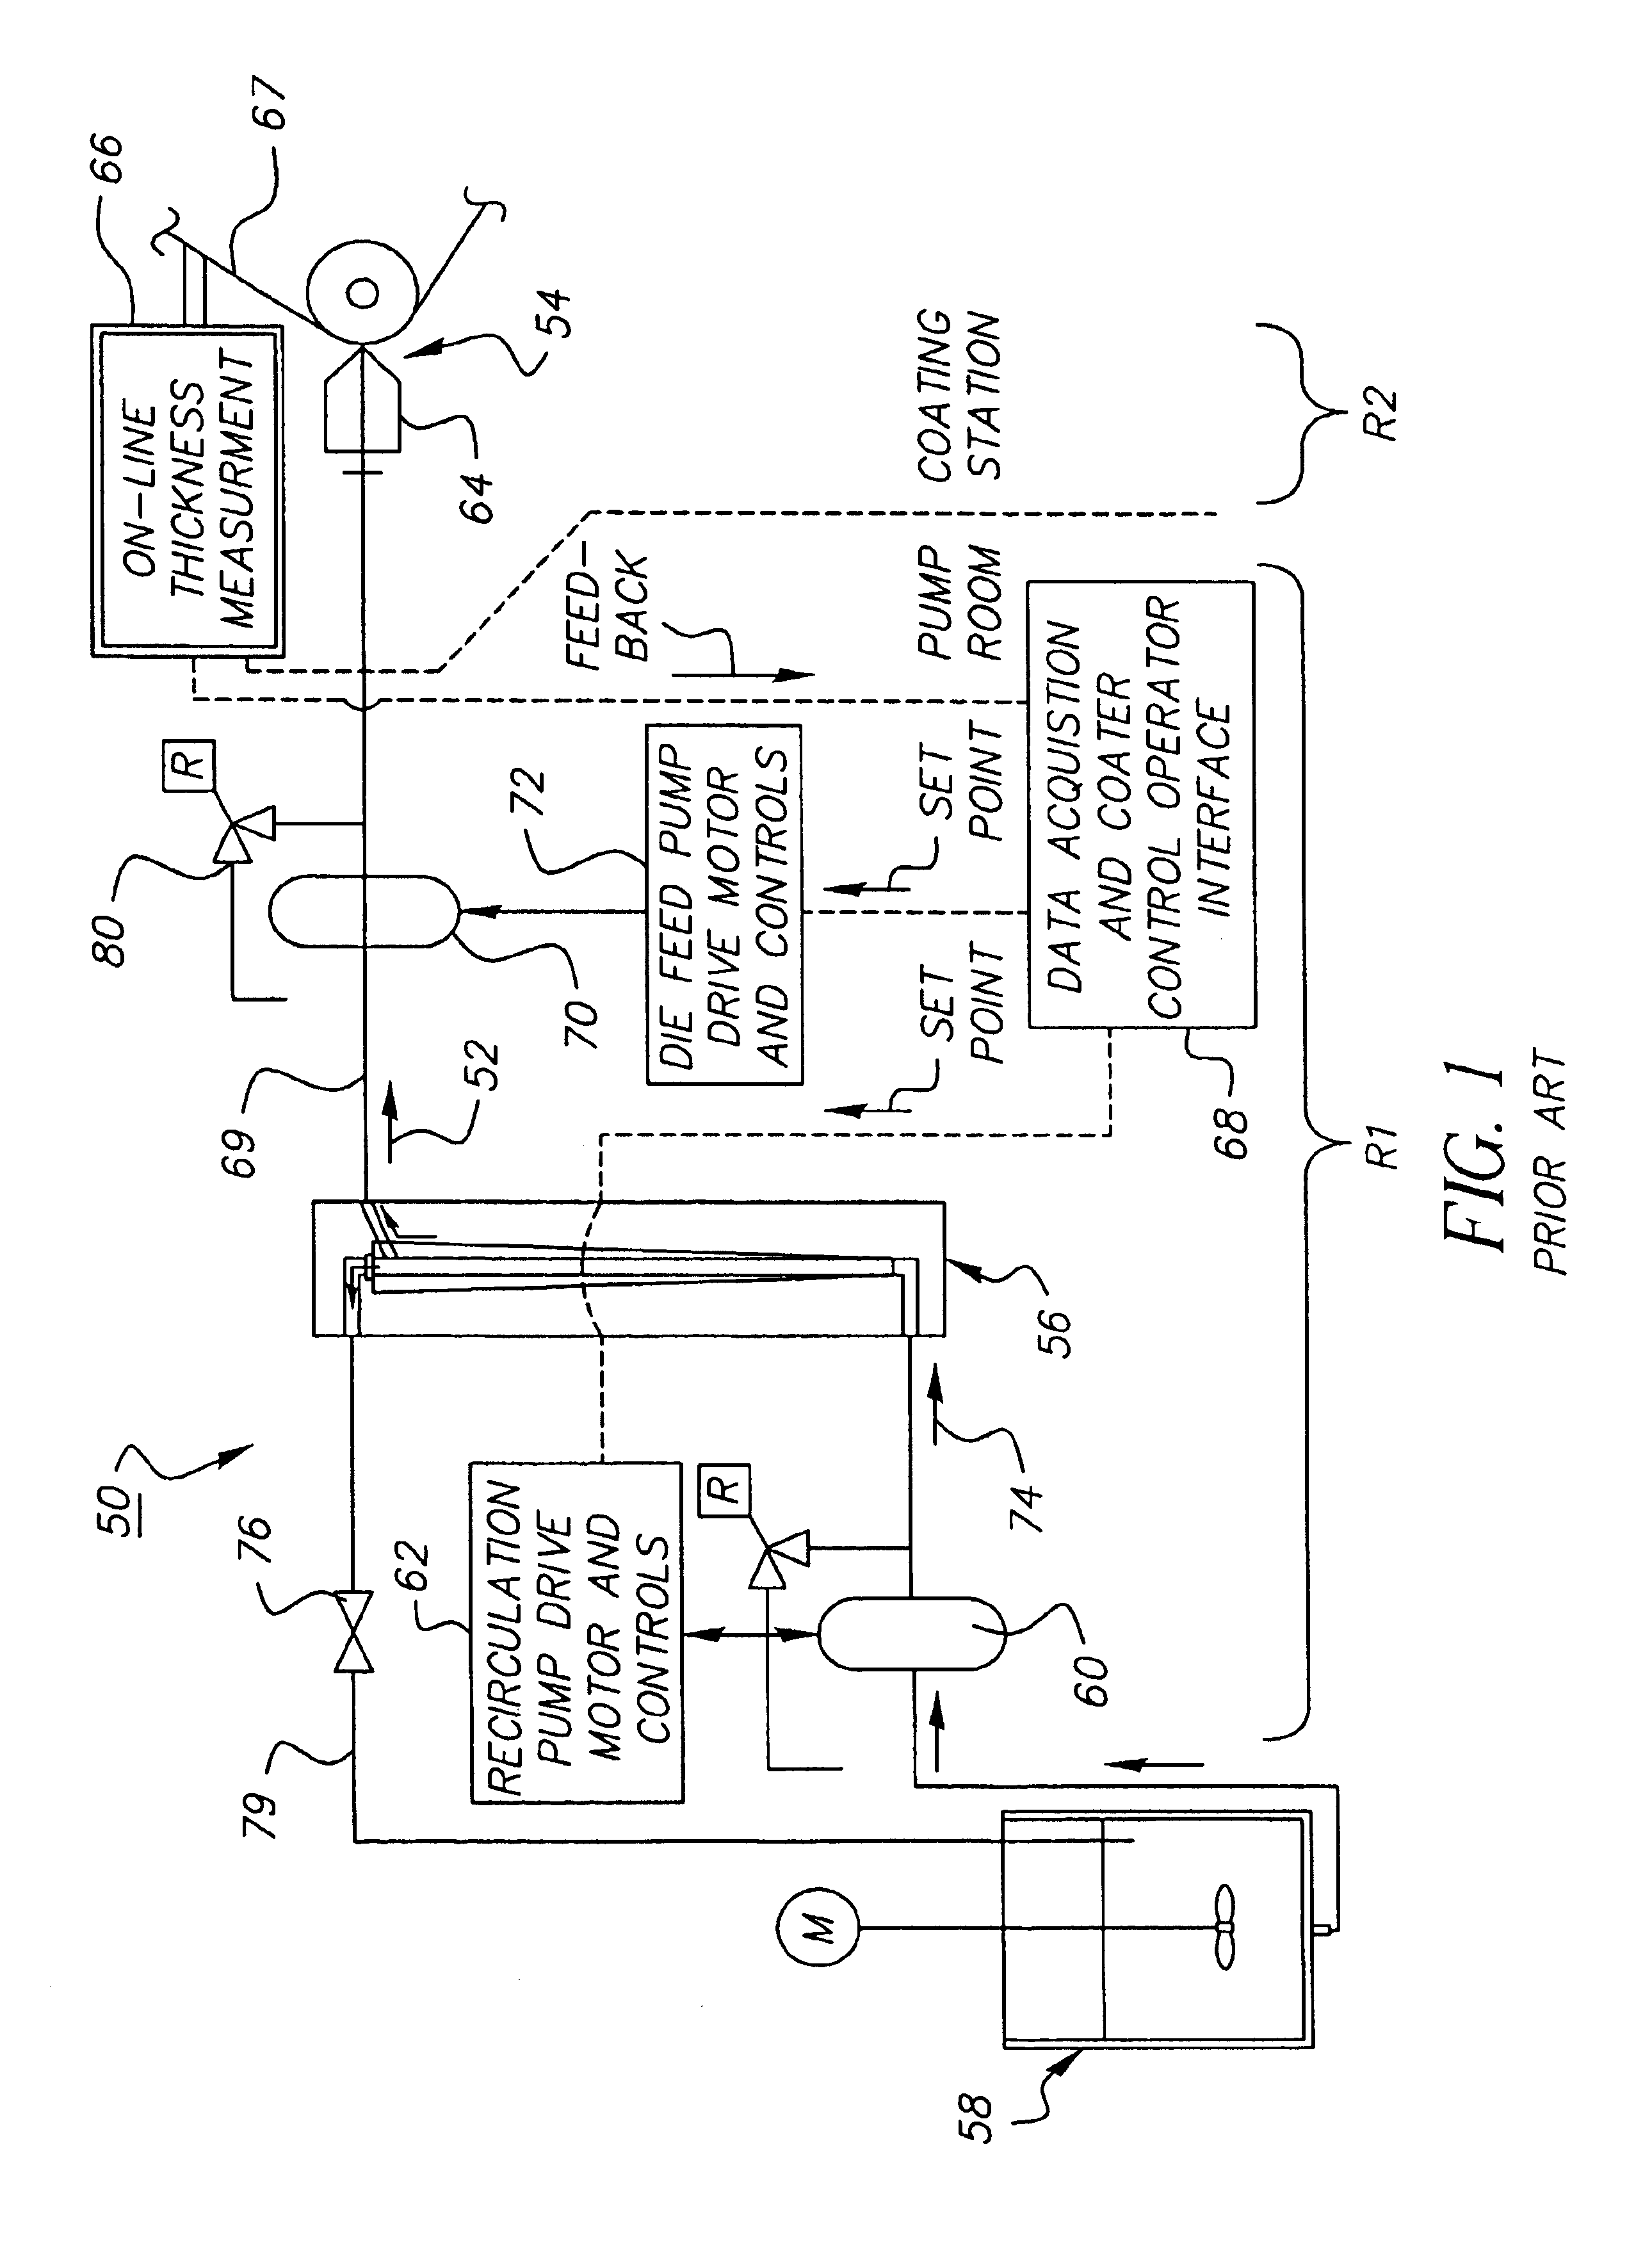 Fluid separation and delivery apparatus and method